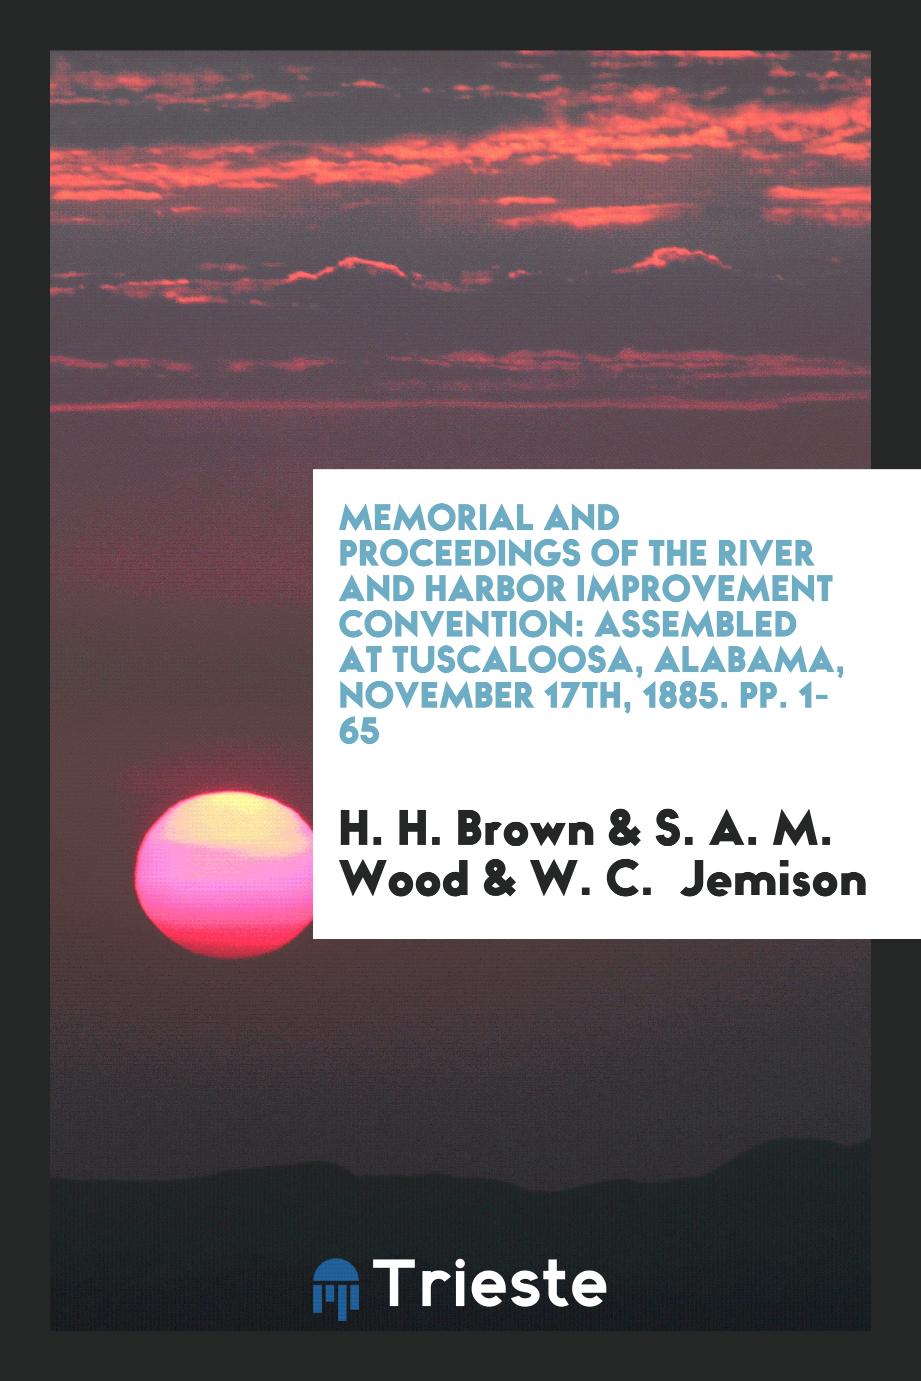 Memorial and Proceedings of the River and Harbor Improvement Convention: Assembled at Tuscaloosa, Alabama, November 17th, 1885. pp. 1-65